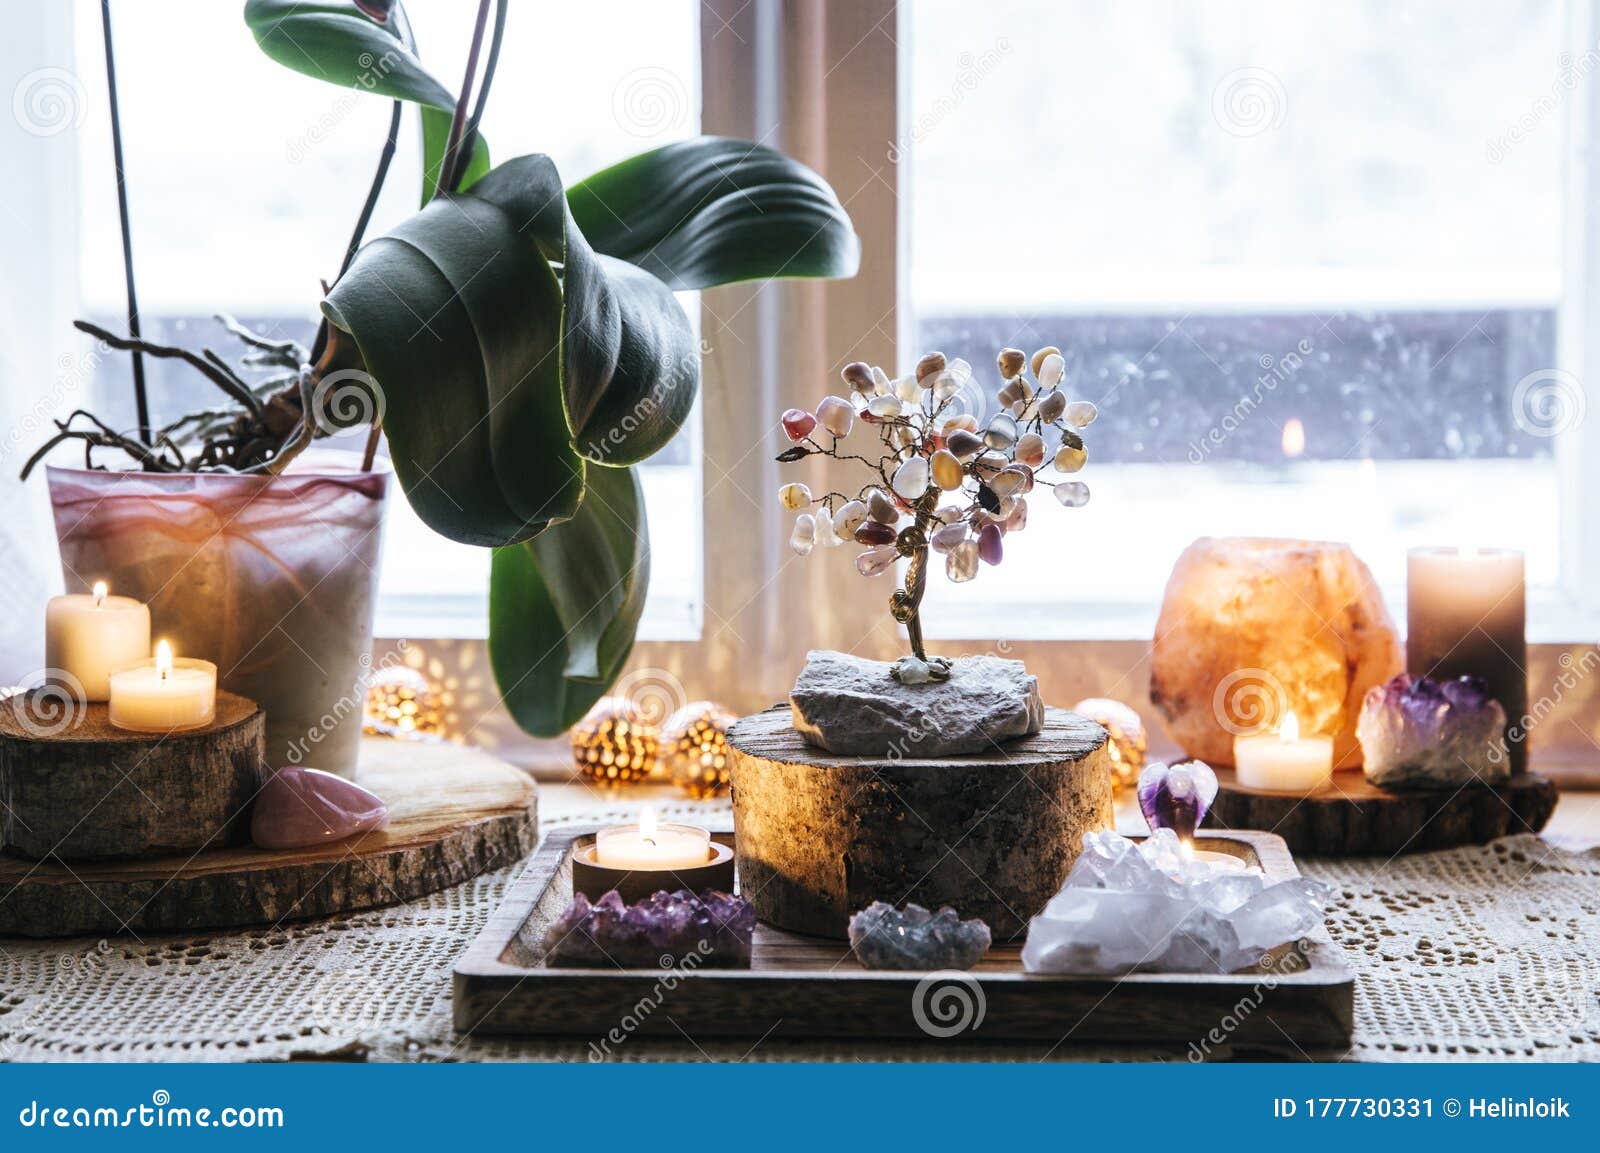 feng shui nature theme altar at home table and on window sill.